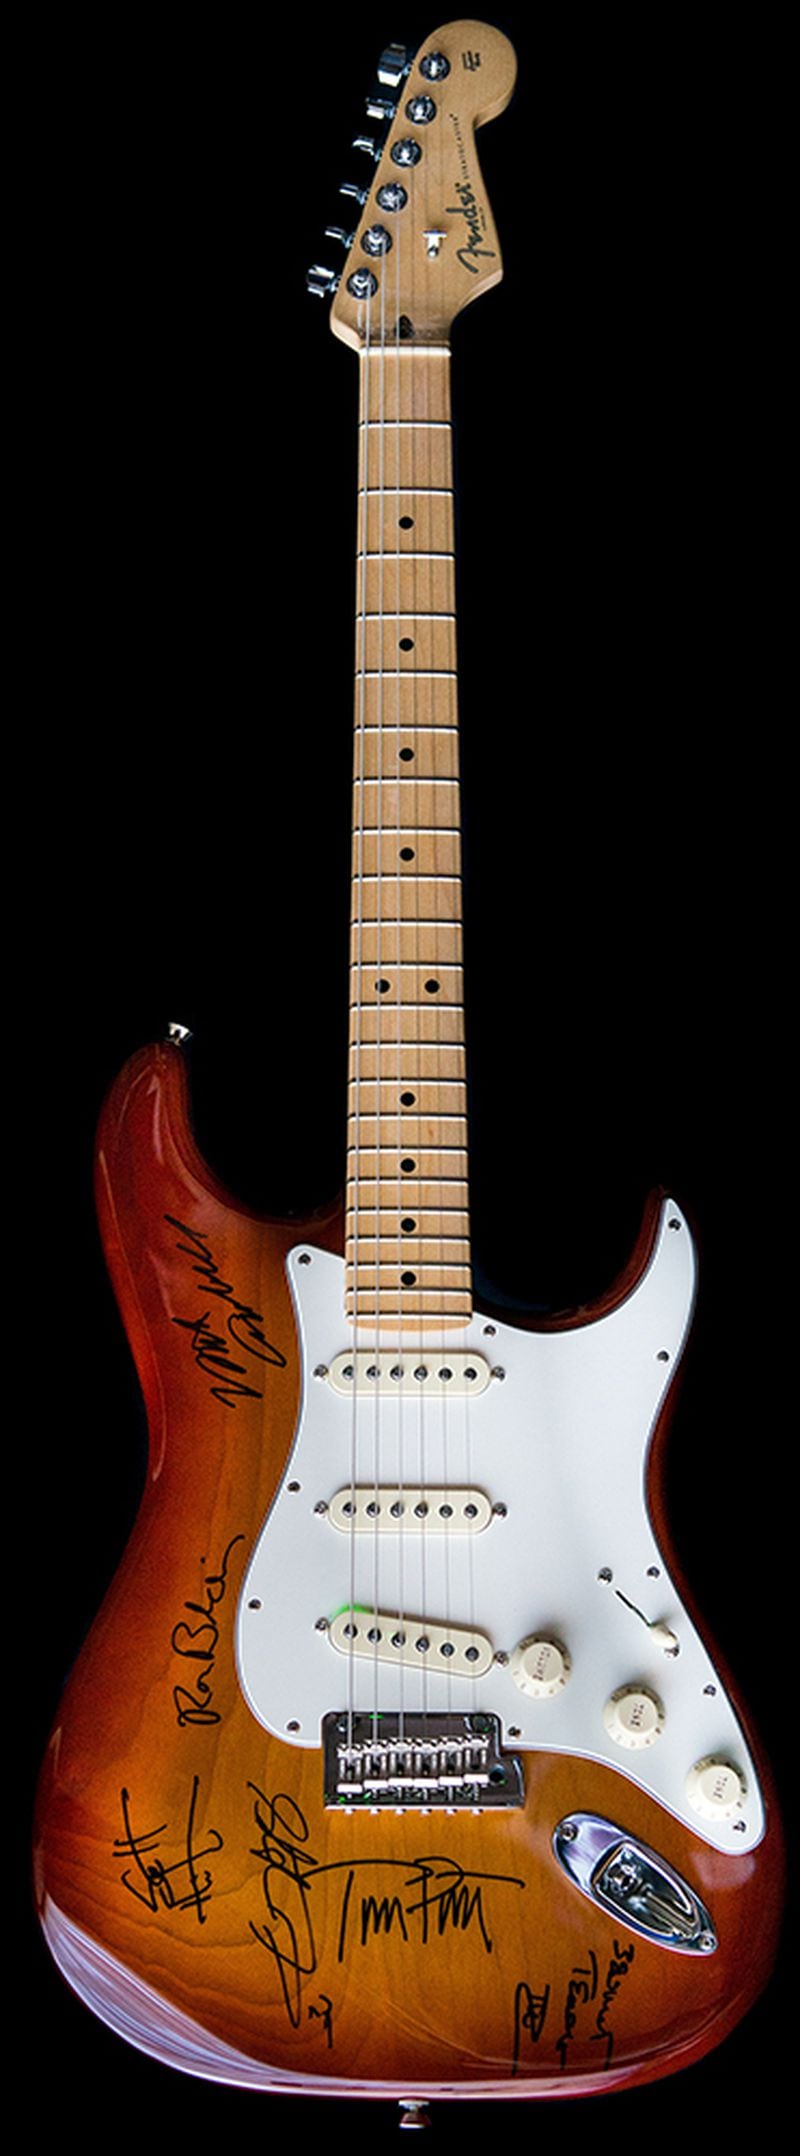 A guitar autographed by Tom Petty and the Heartbreakers, valued at $25,000.